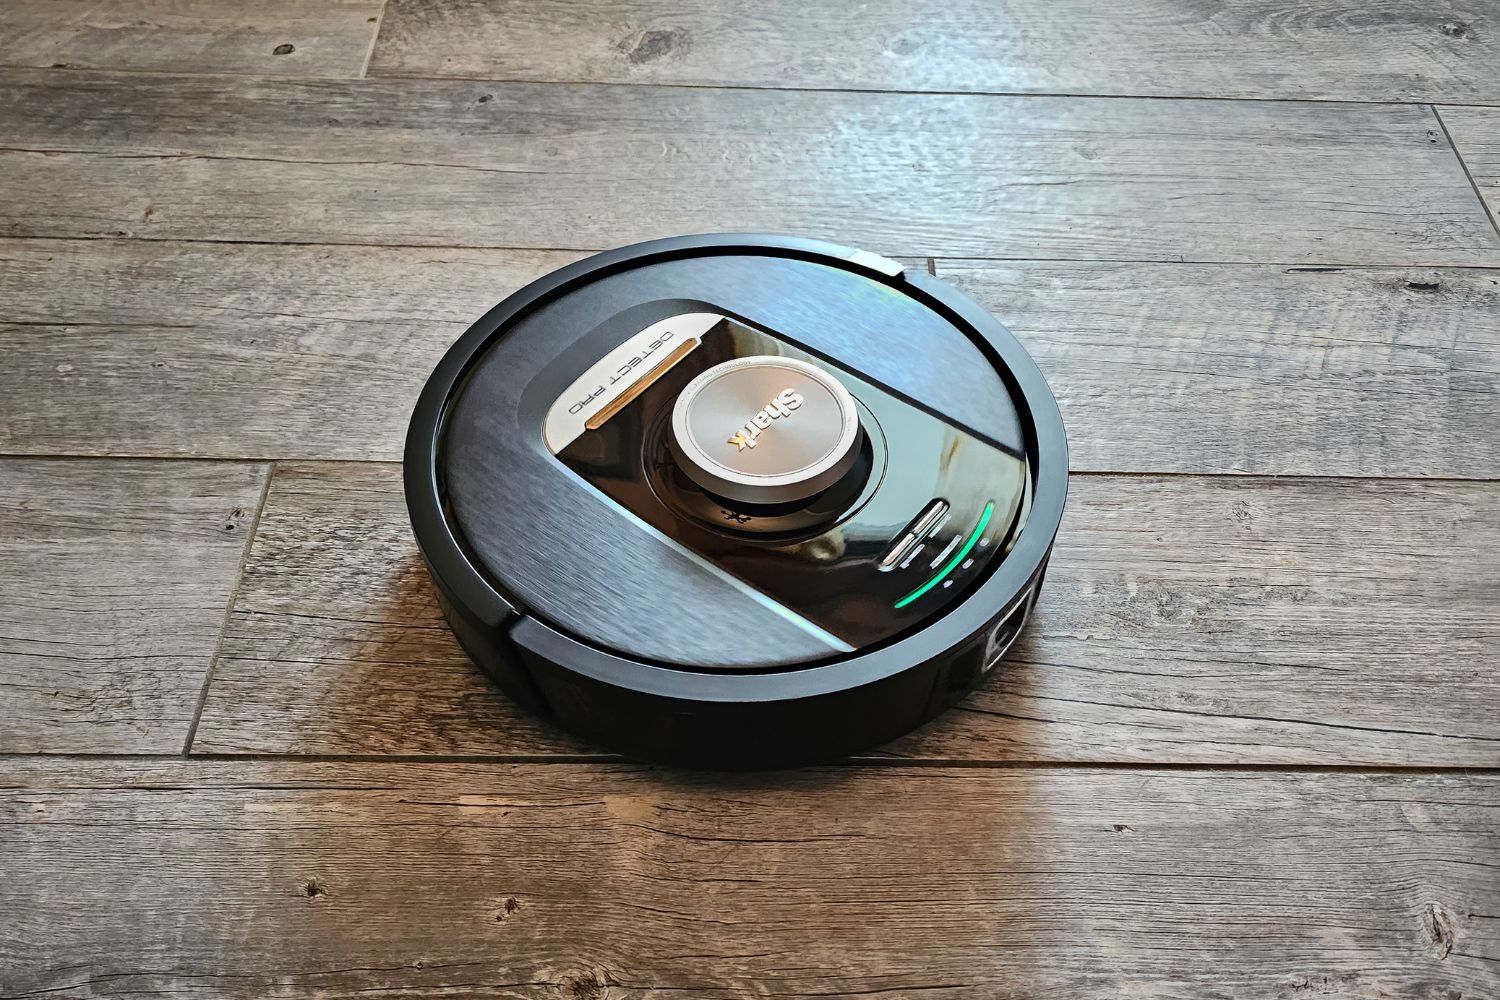 The best robot vacuum option cleaning a wood floor.